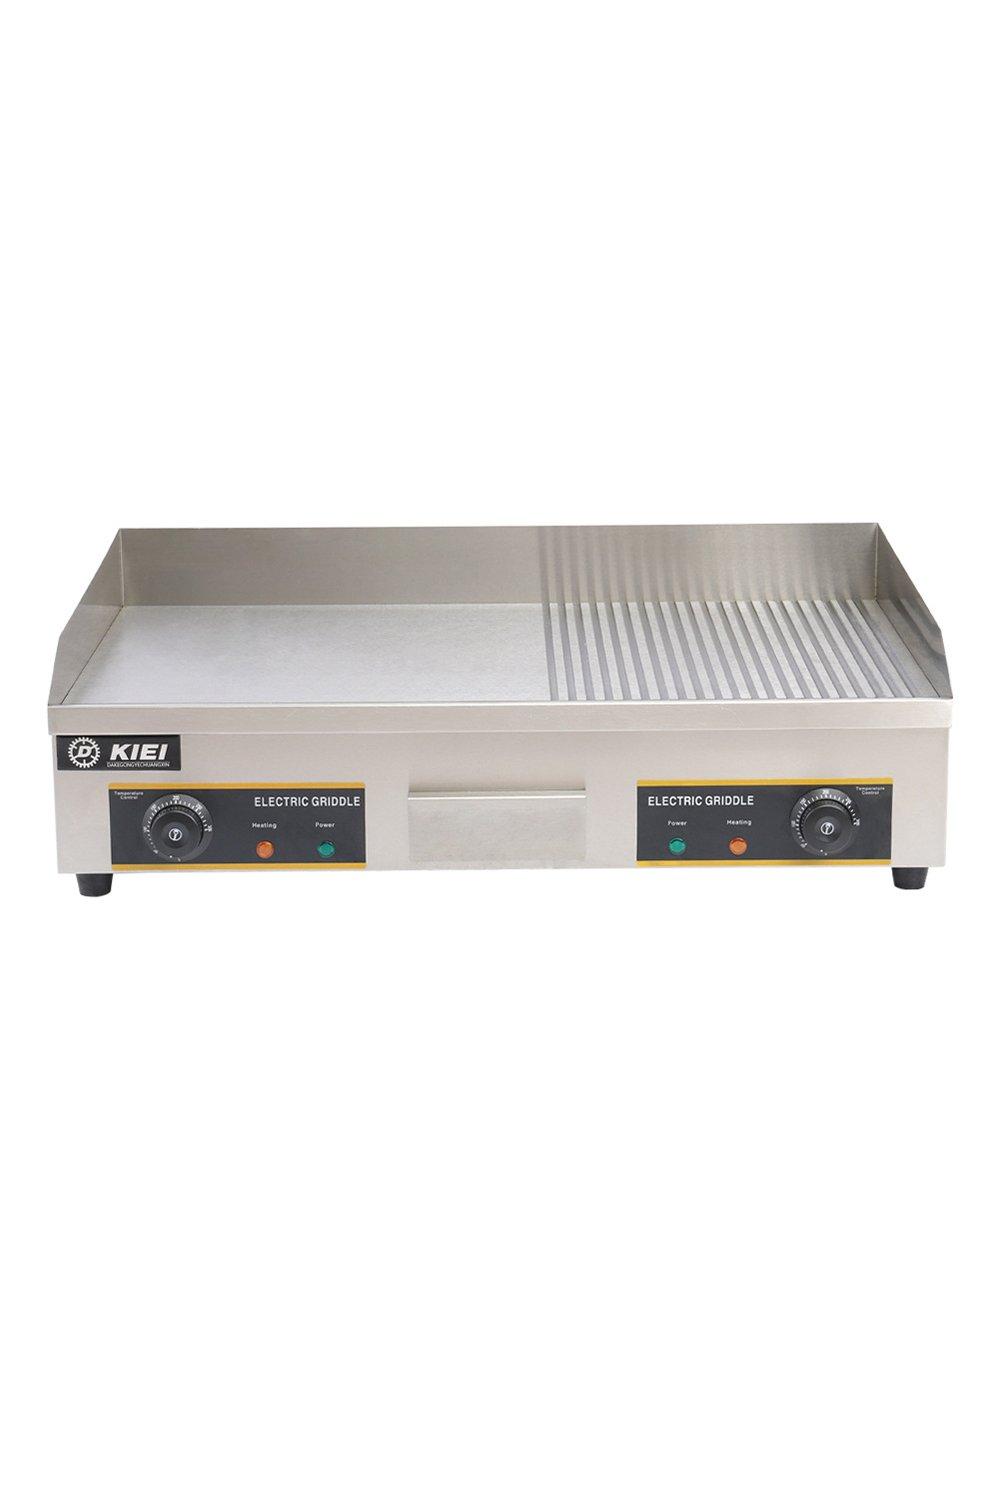 2-in-1 Electric Countertop Half Grooved/Flat Griddle Adjustable Temps with Fat Drainage Drawer